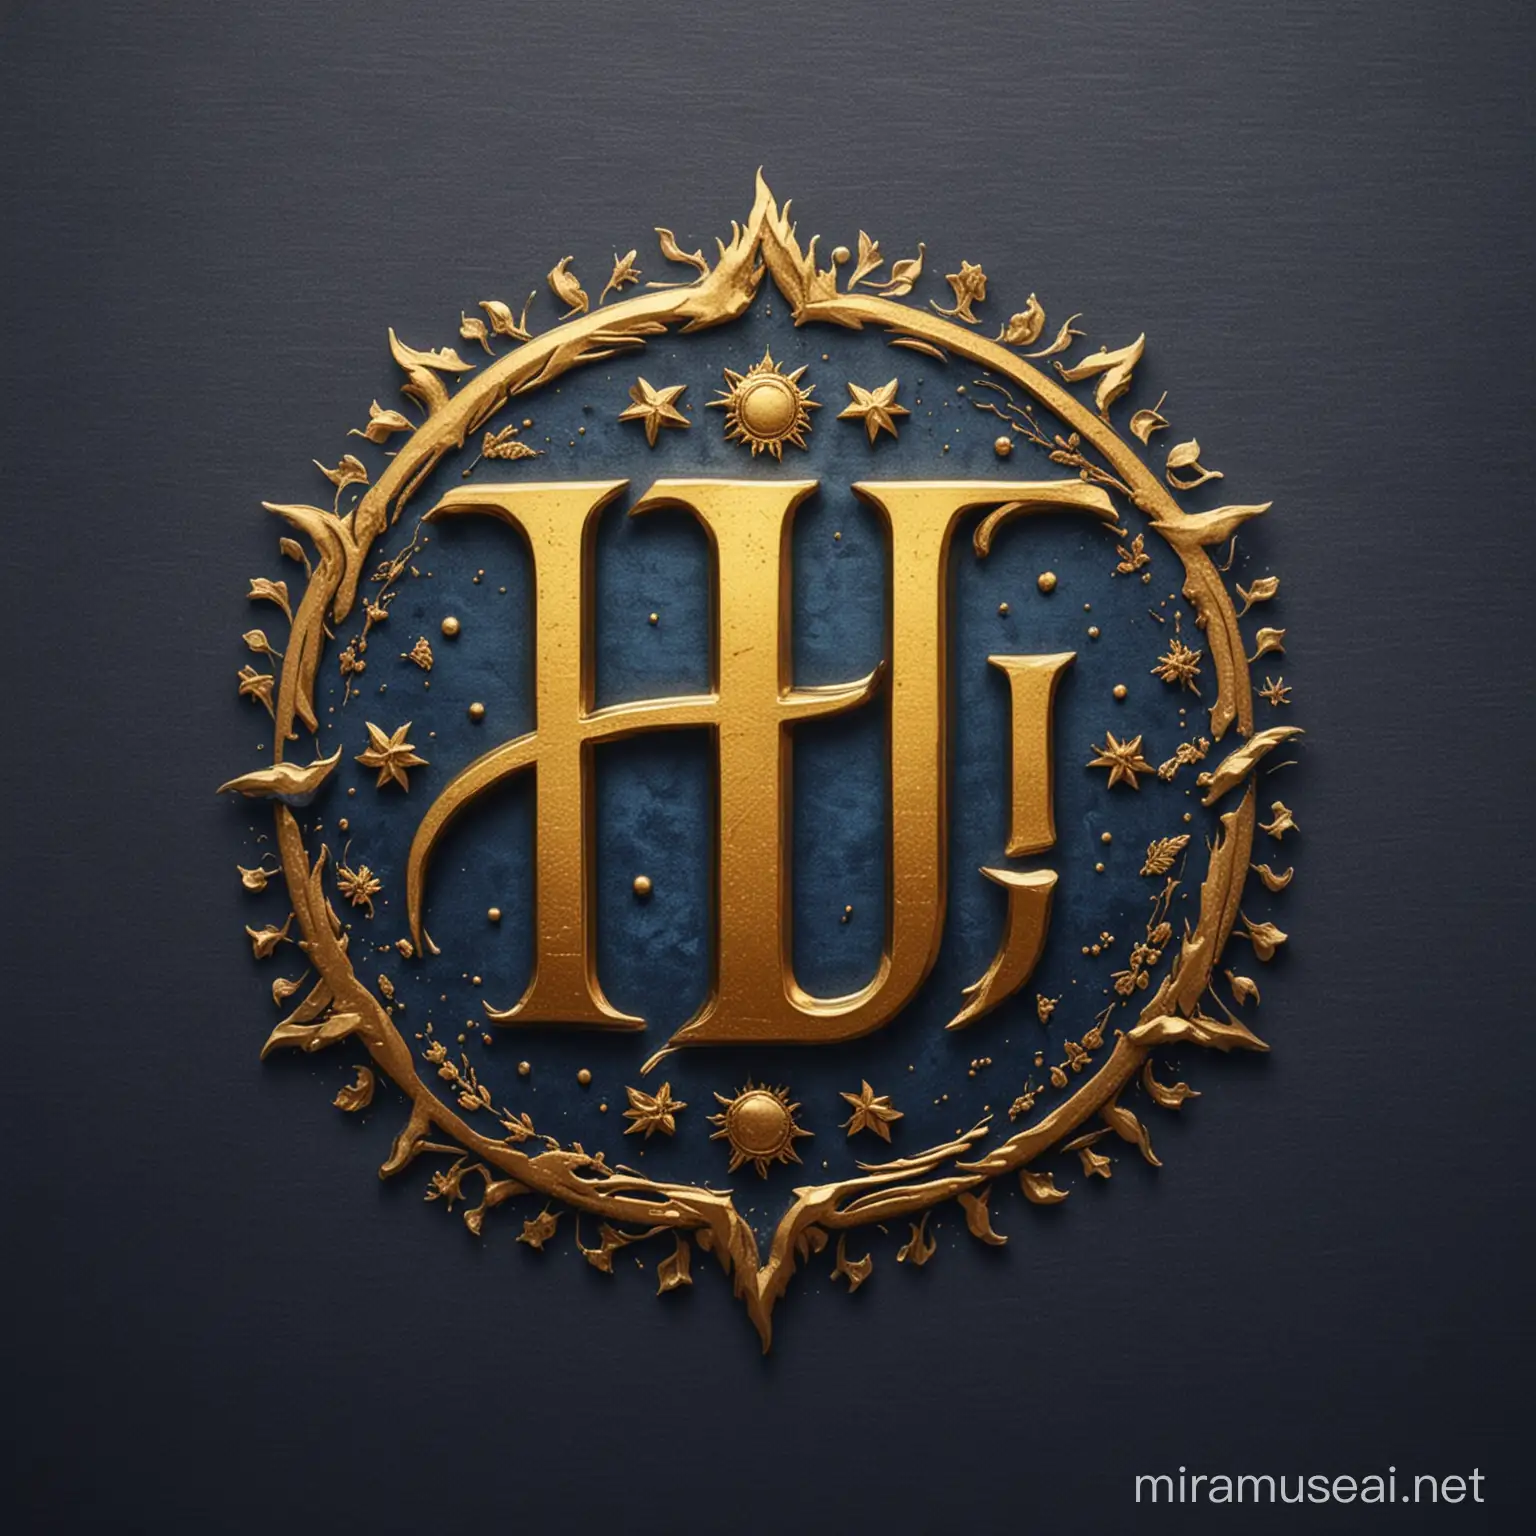 create a logo, with the colors oxford blue and gold, with the elements being an H on top of a golden sun